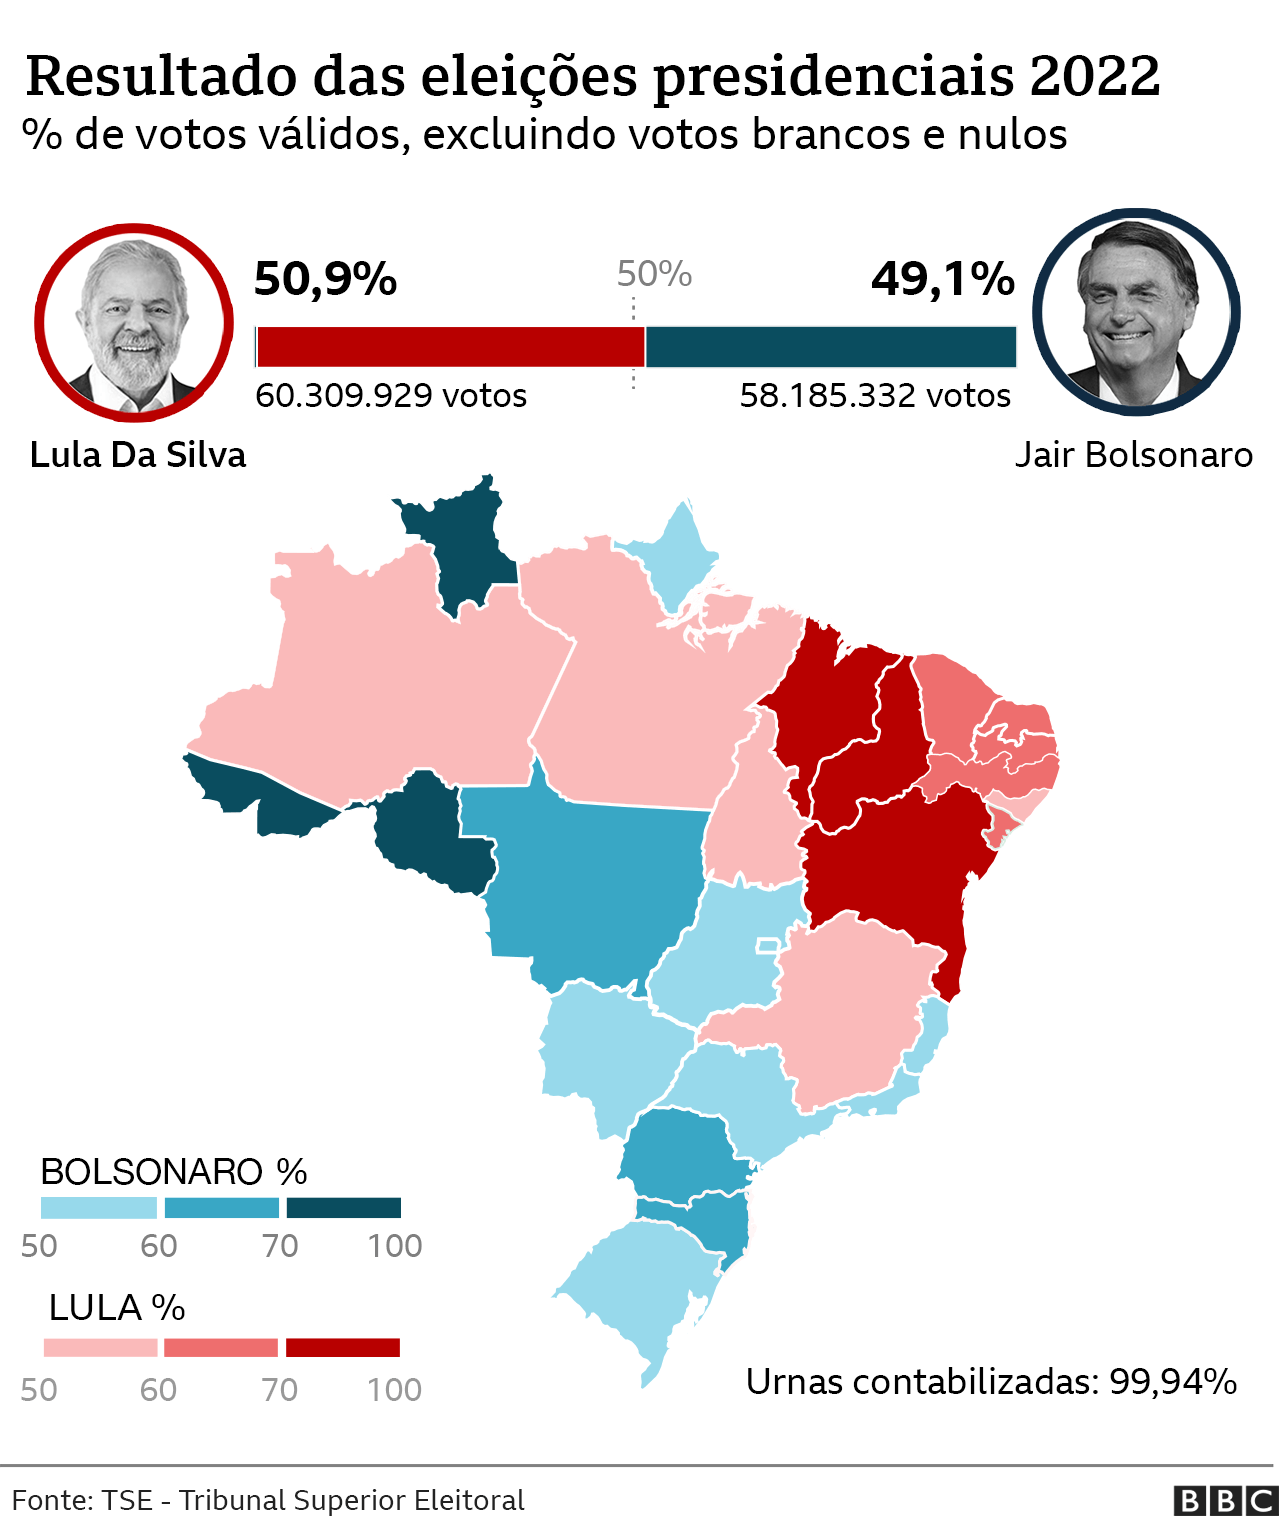 Map of votes for Lula and Bolsonaro by state in Brazil